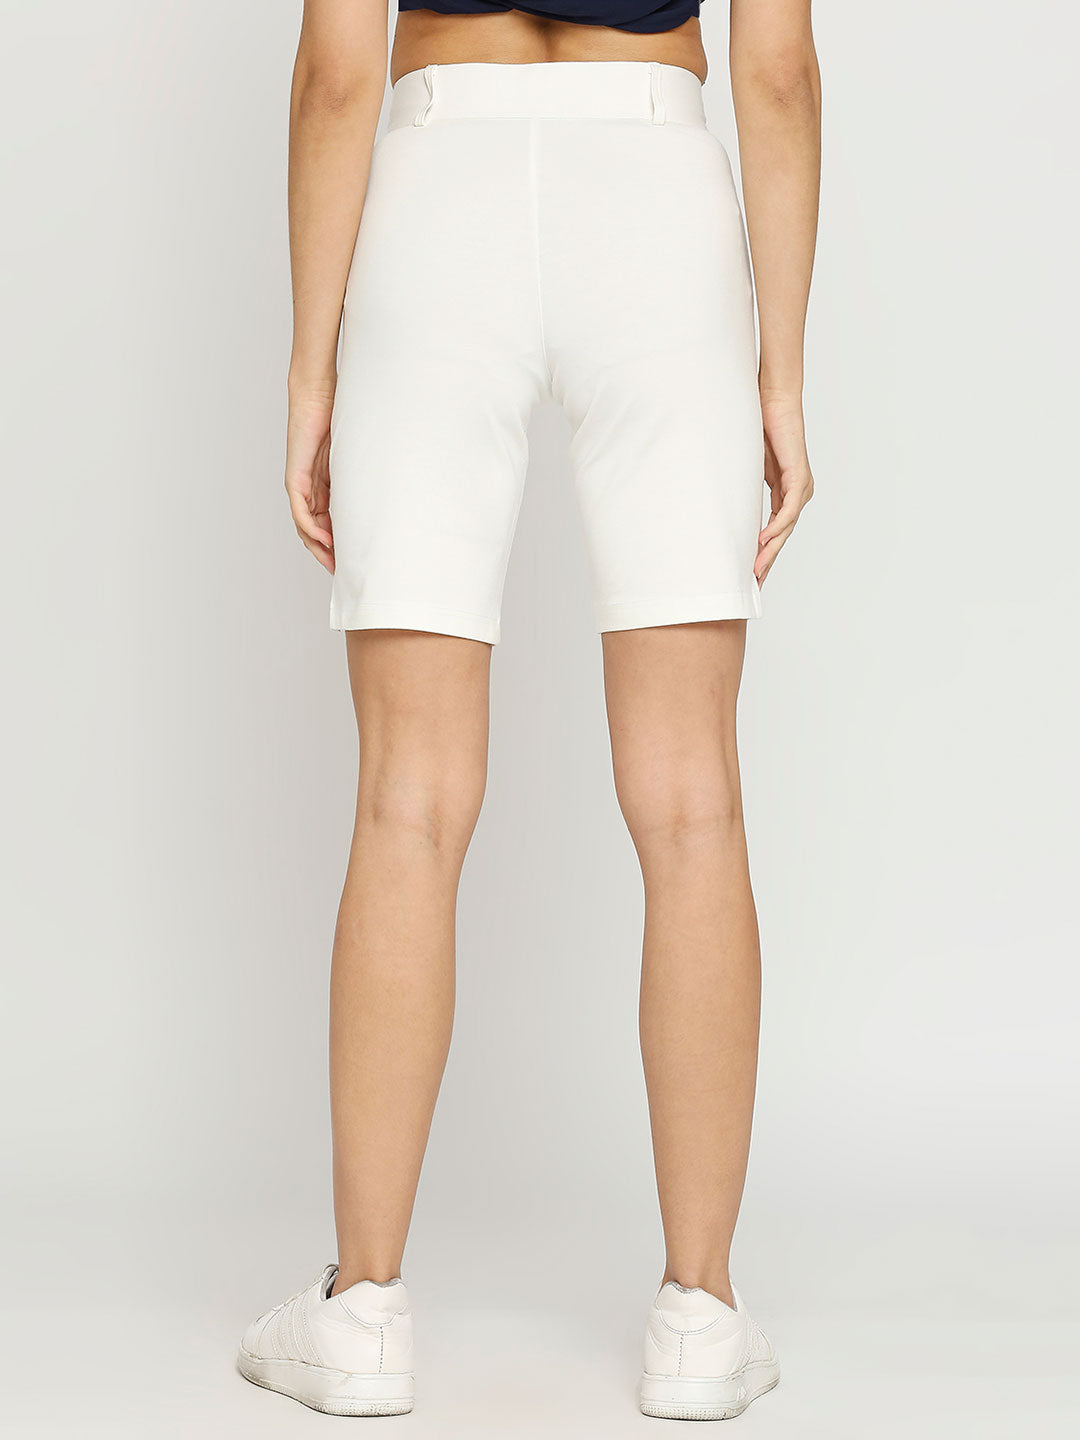 Women's White Golf Shorts with Welt Pockets - 1